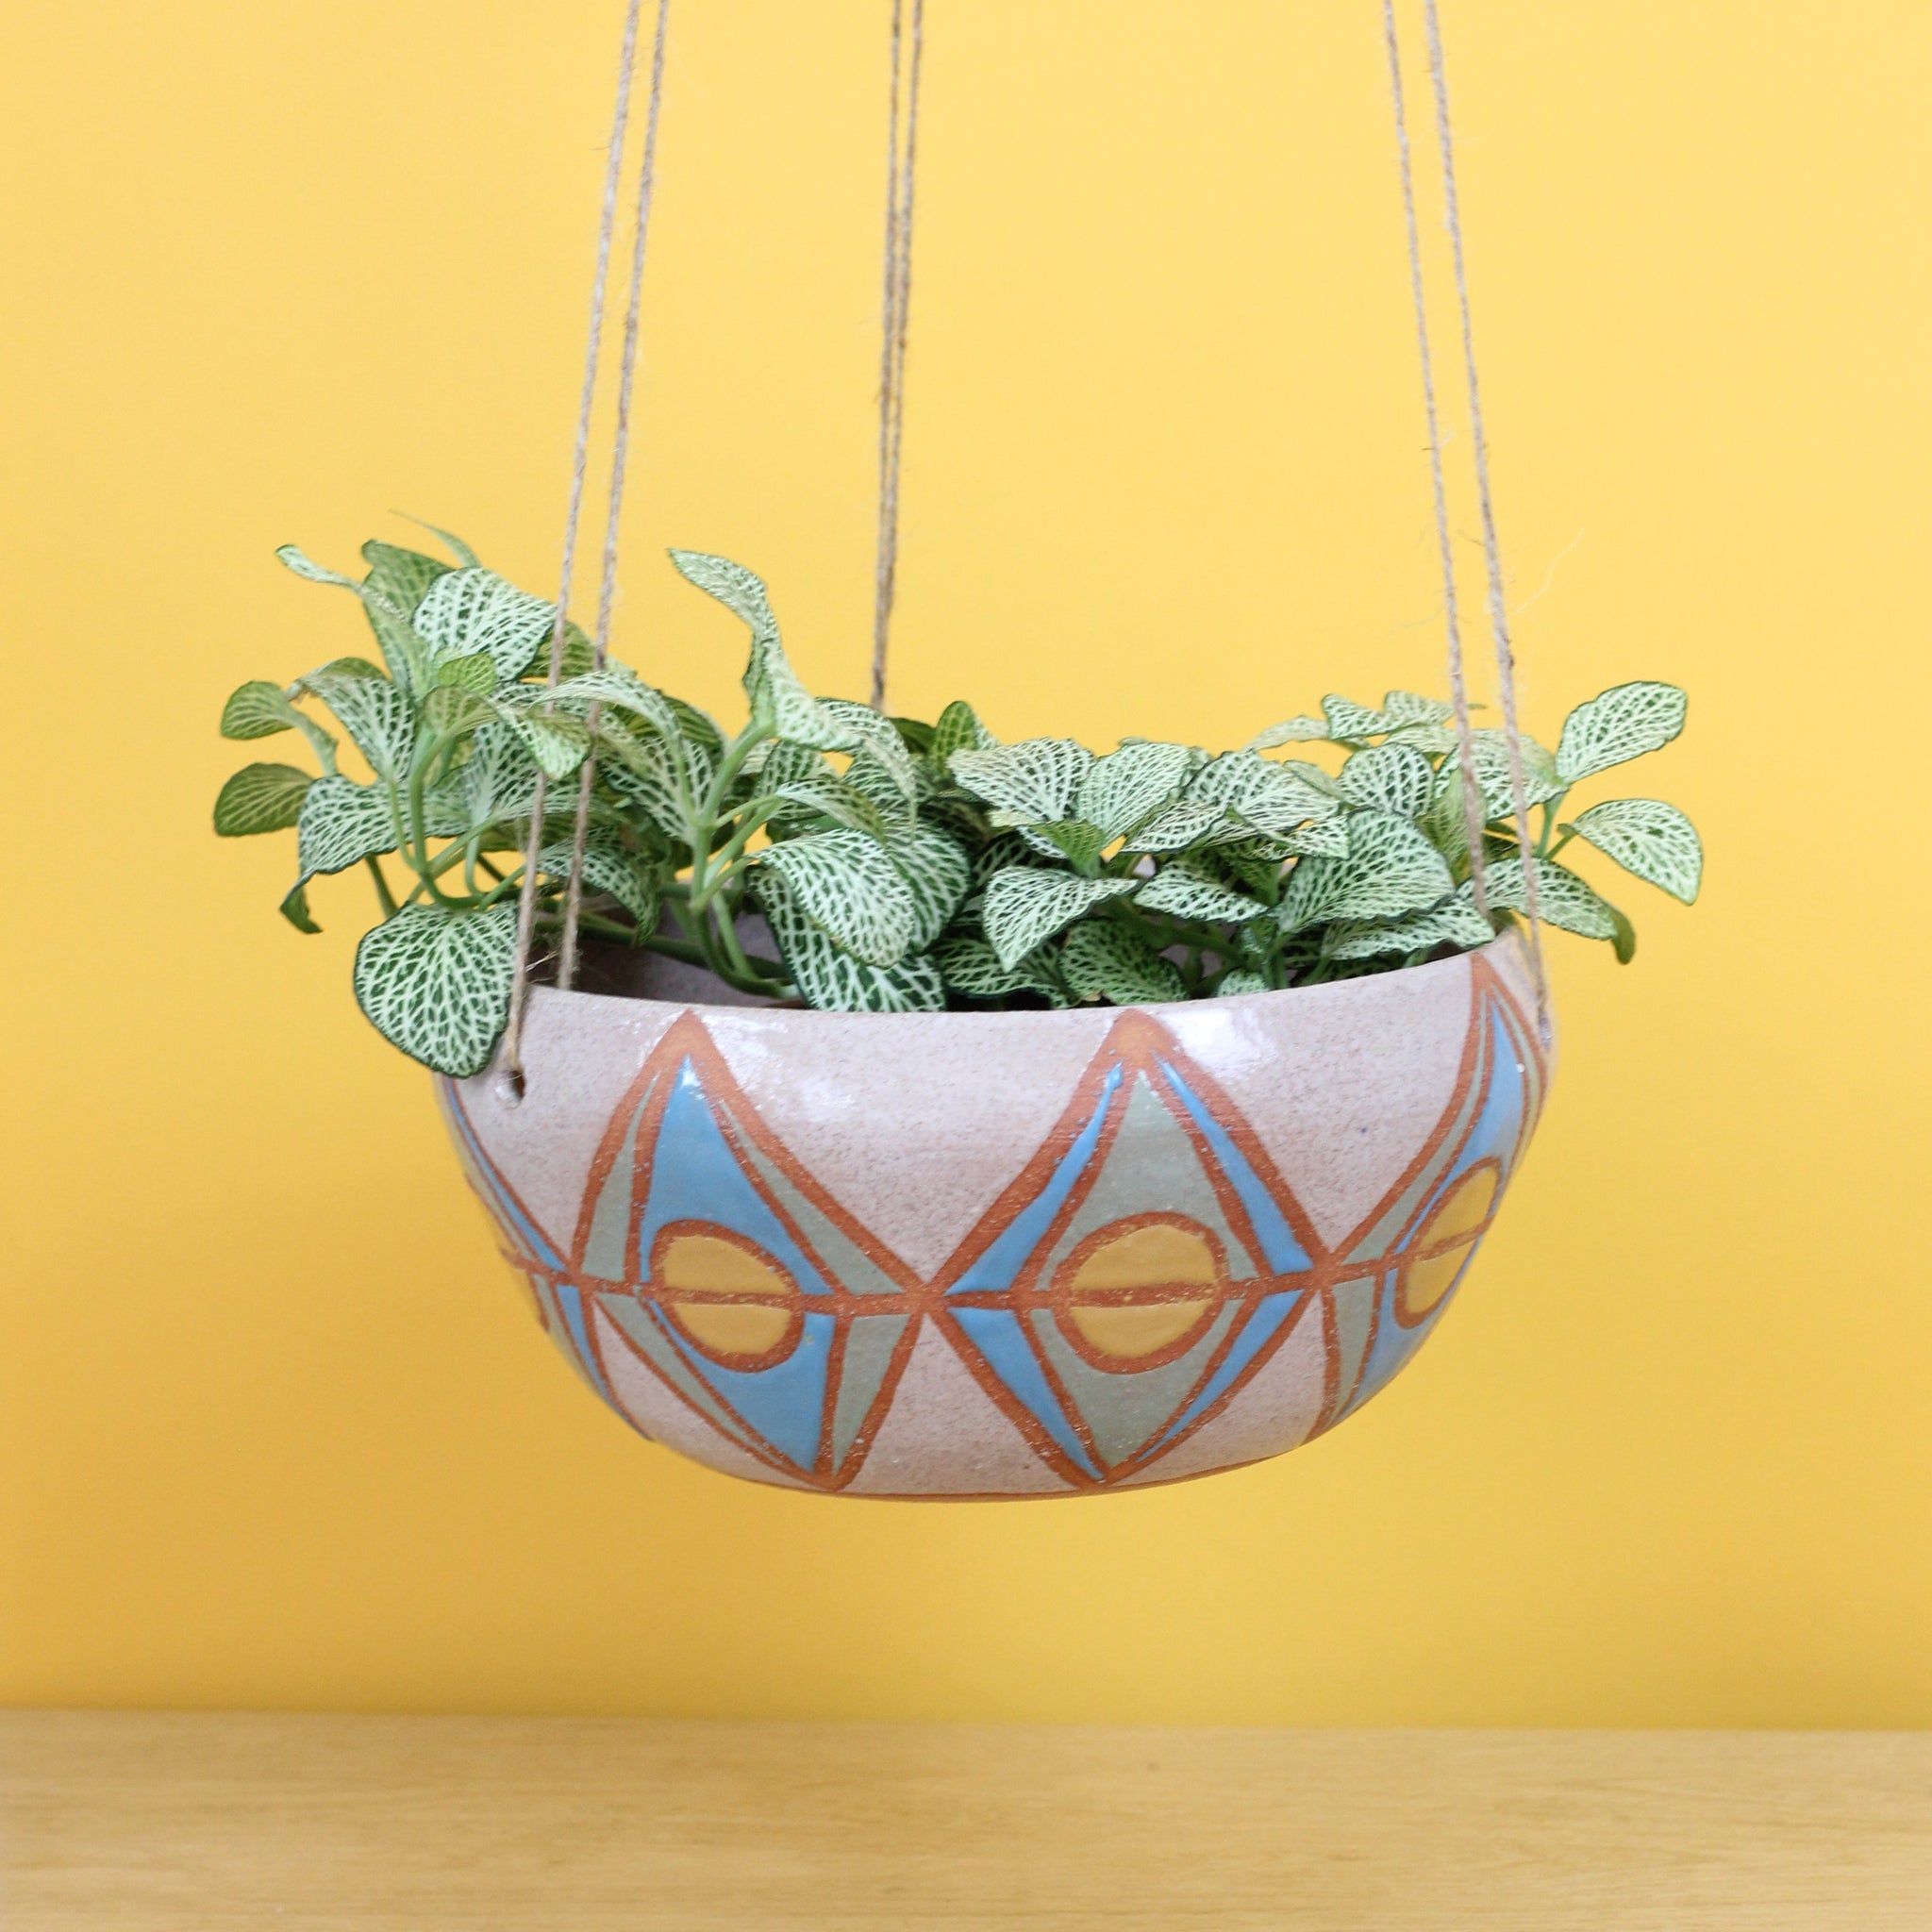 Made-to-Order Glazed Stoneware Hanging Pot with Diamond Pattern